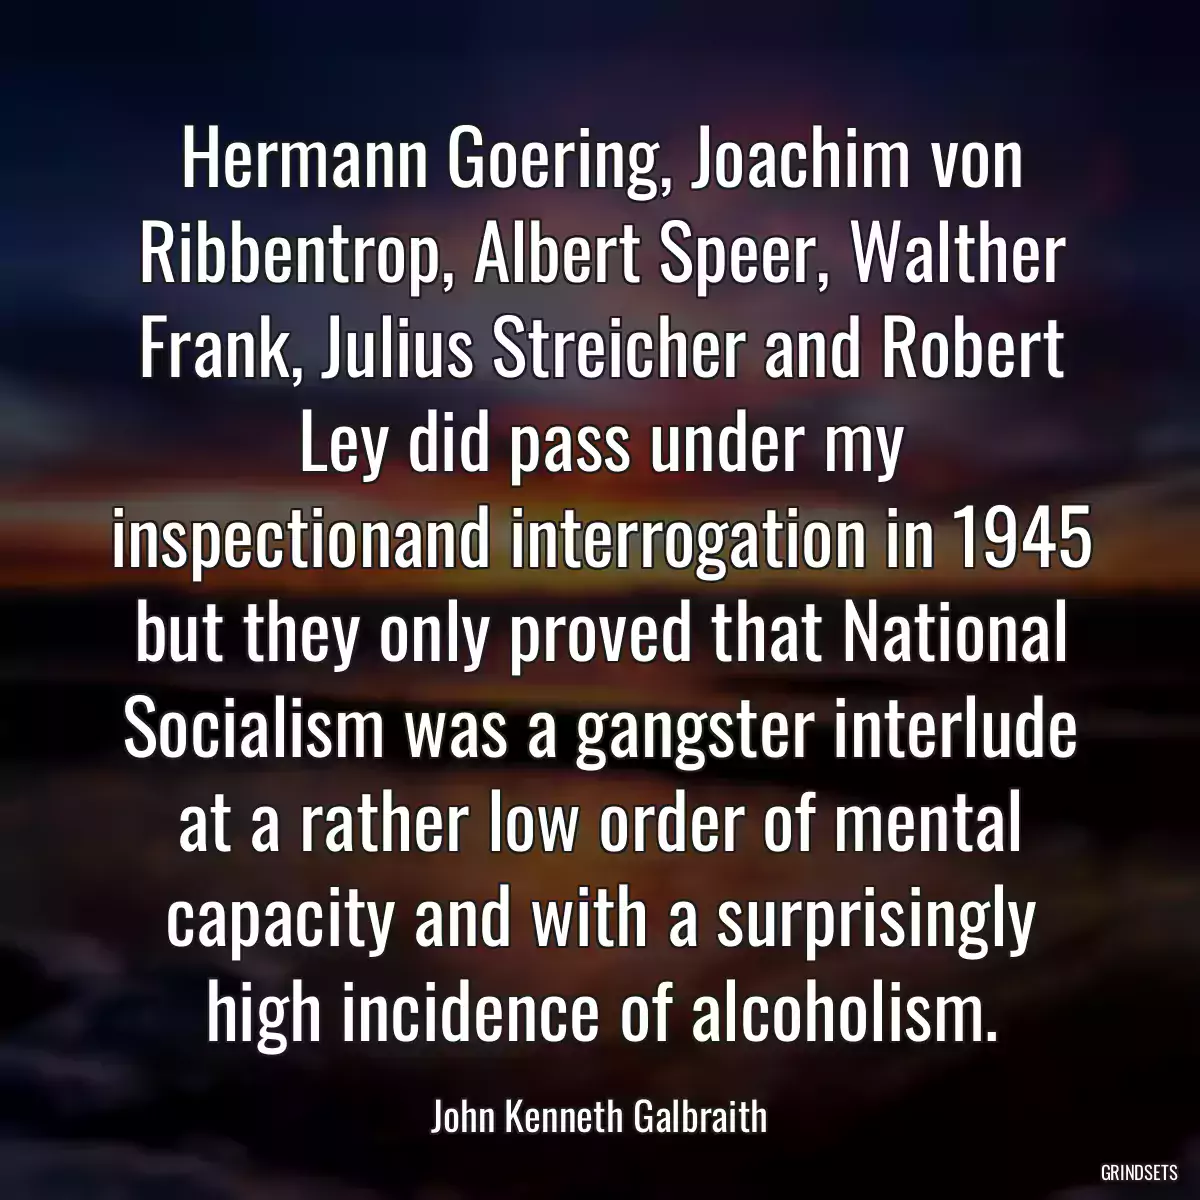 Hermann Goering, Joachim von Ribbentrop, Albert Speer, Walther Frank, Julius Streicher and Robert Ley did pass under my inspectionand interrogation in 1945 but they only proved that National Socialism was a gangster interlude at a rather low order of mental capacity and with a surprisingly high incidence of alcoholism.